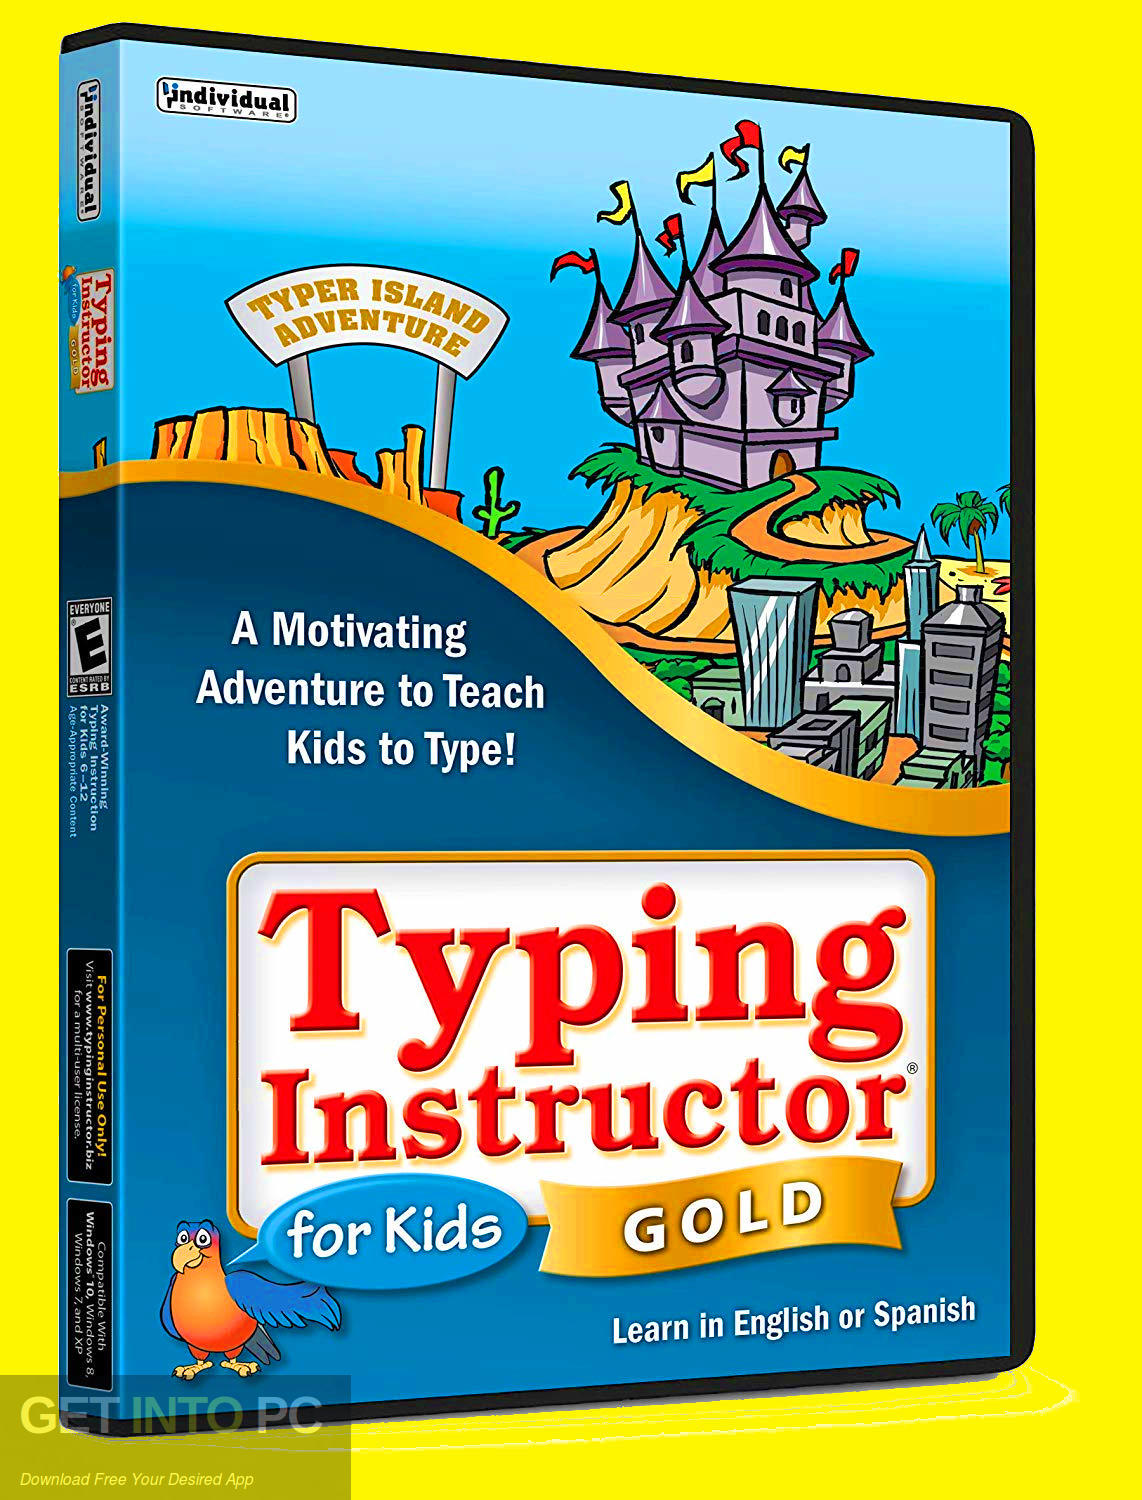 Typing Instructor for Kids Gold Edition 2019 Free Download GetintoPC.com